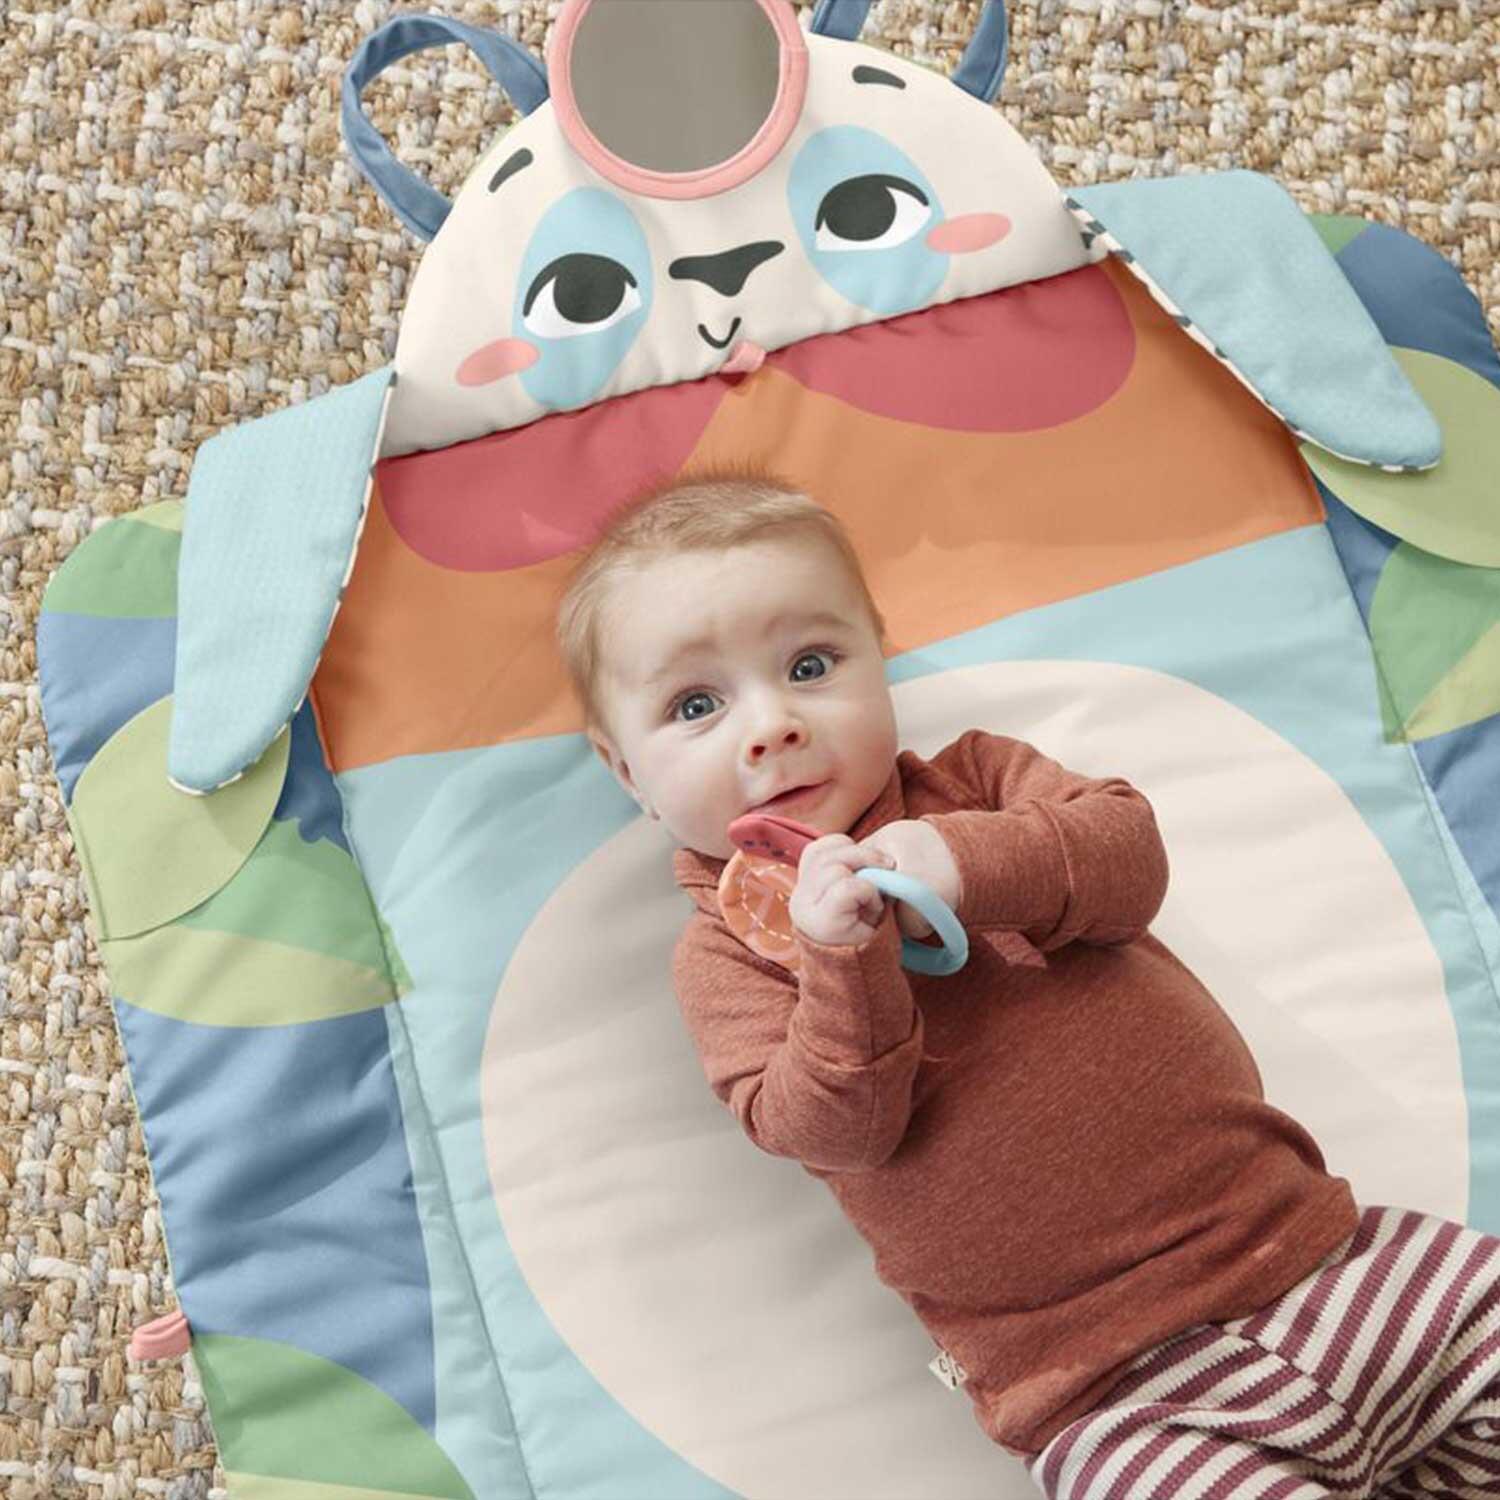 Fisher Price Sustain Roly Poly Panda Play Mat